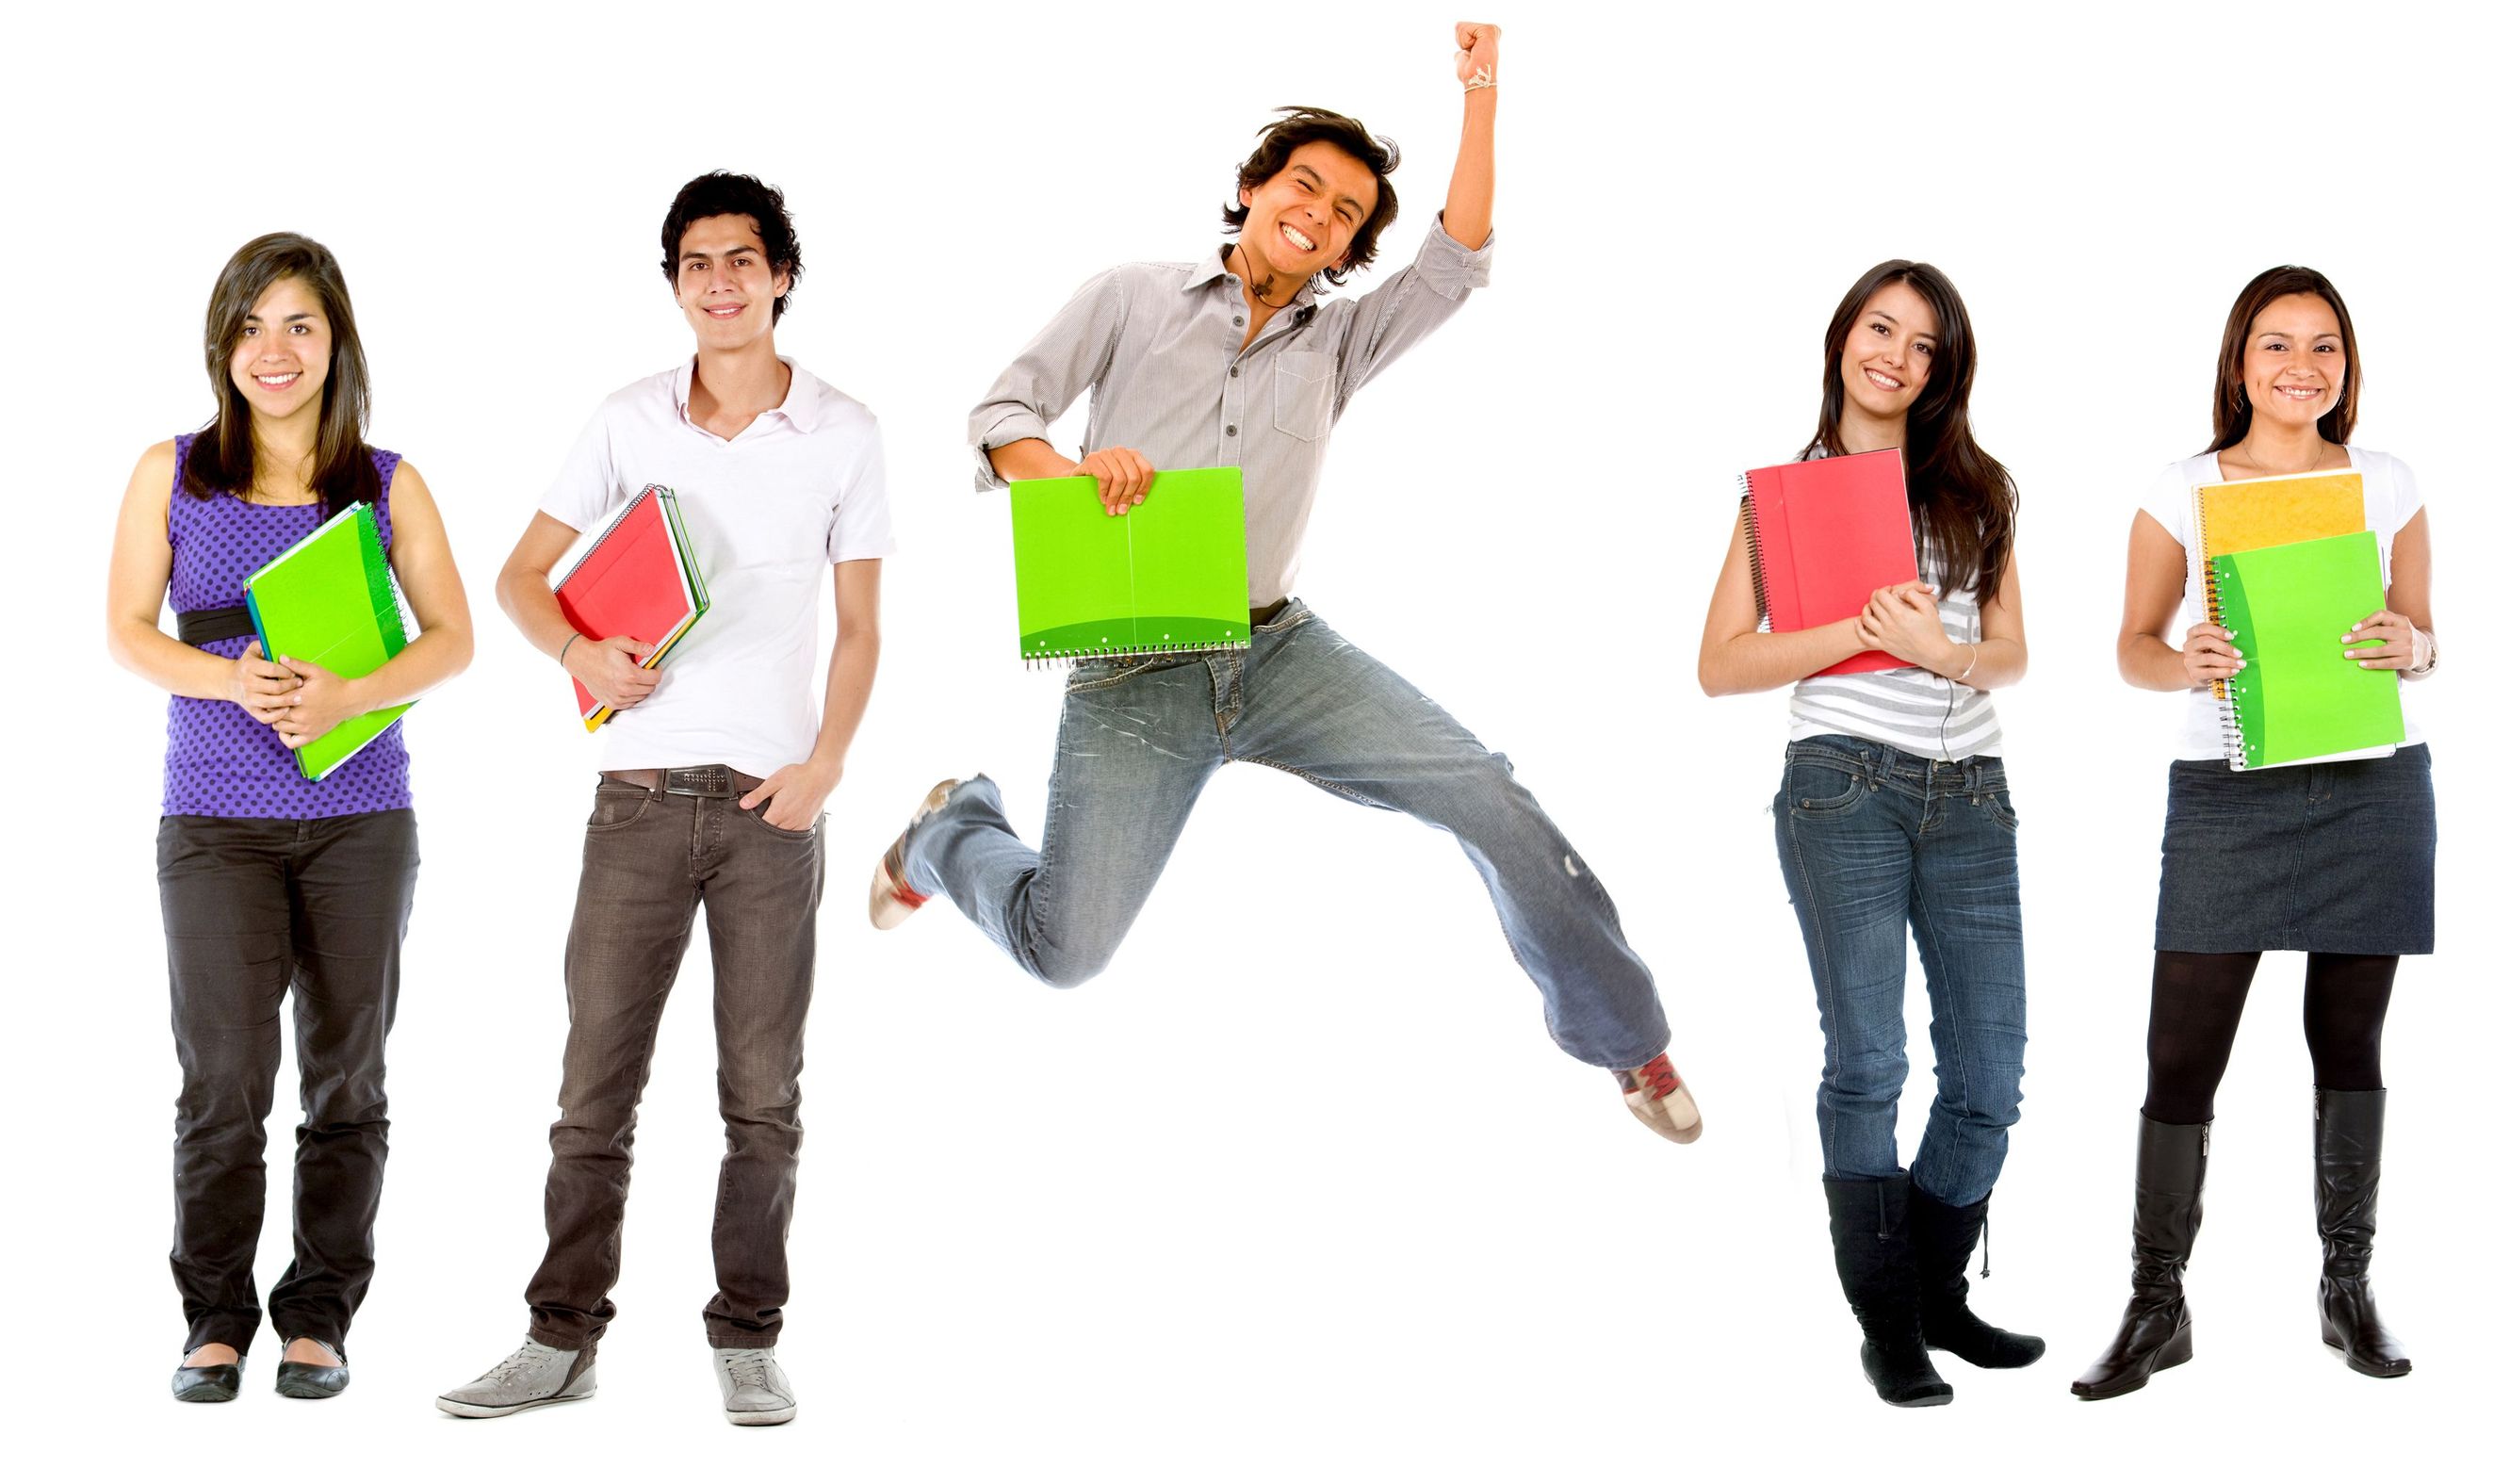 Students Wallpapers High Quality | Download Free